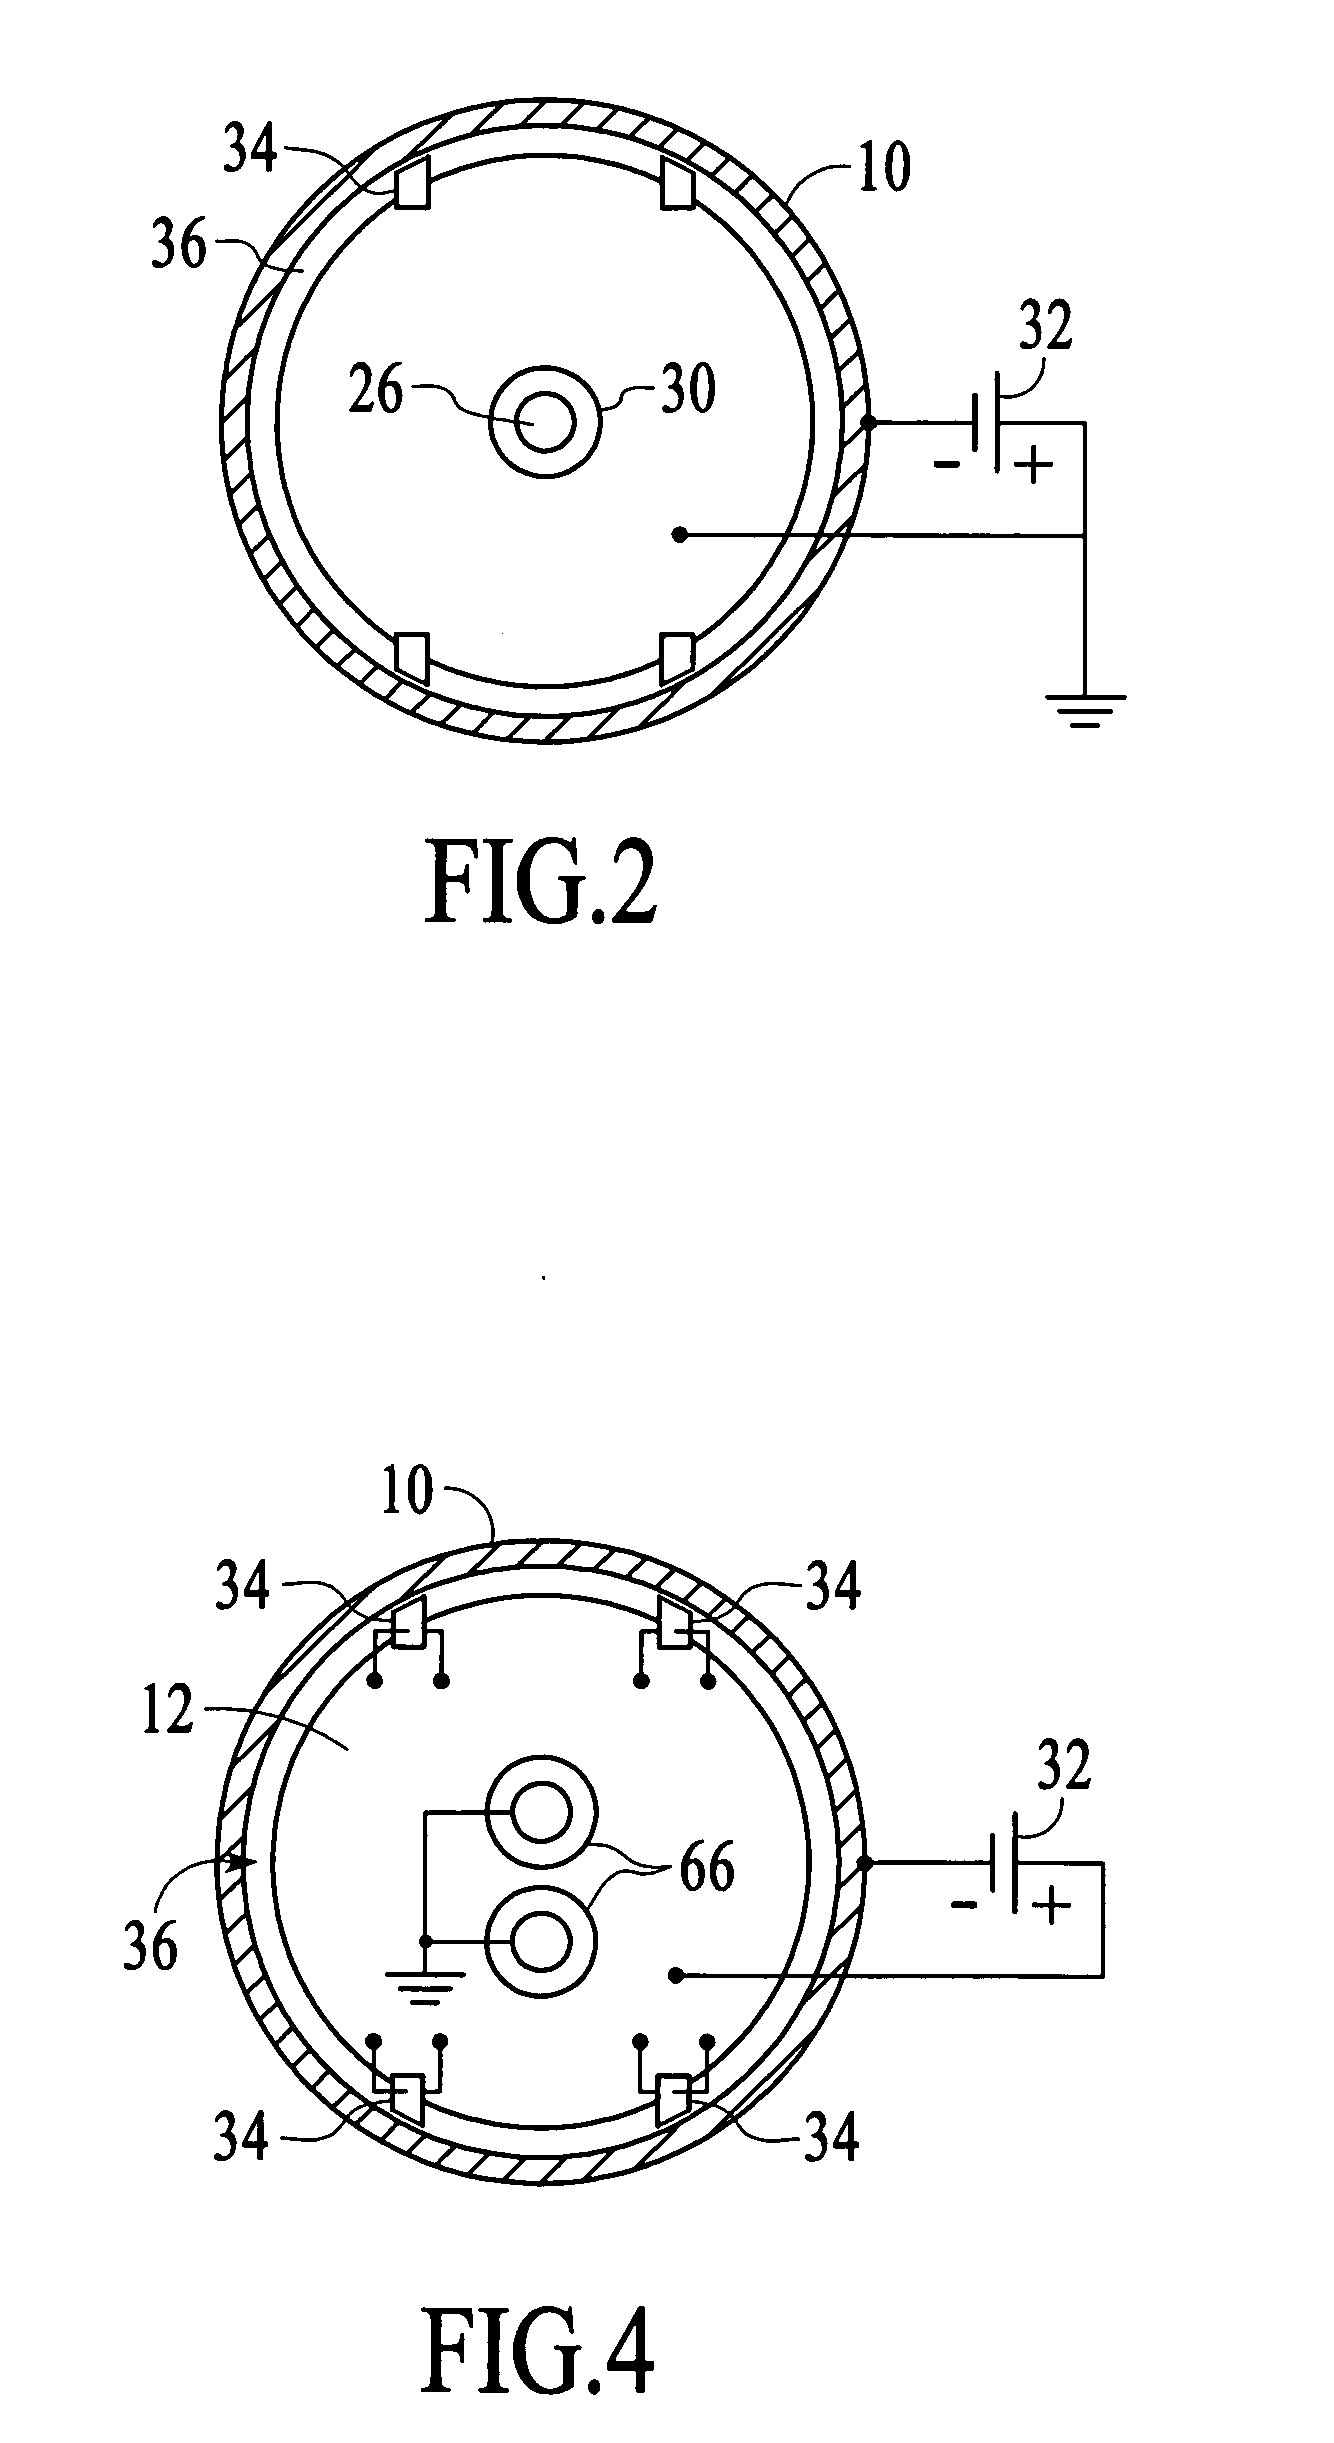 Method and system for coating sections of internal surfaces